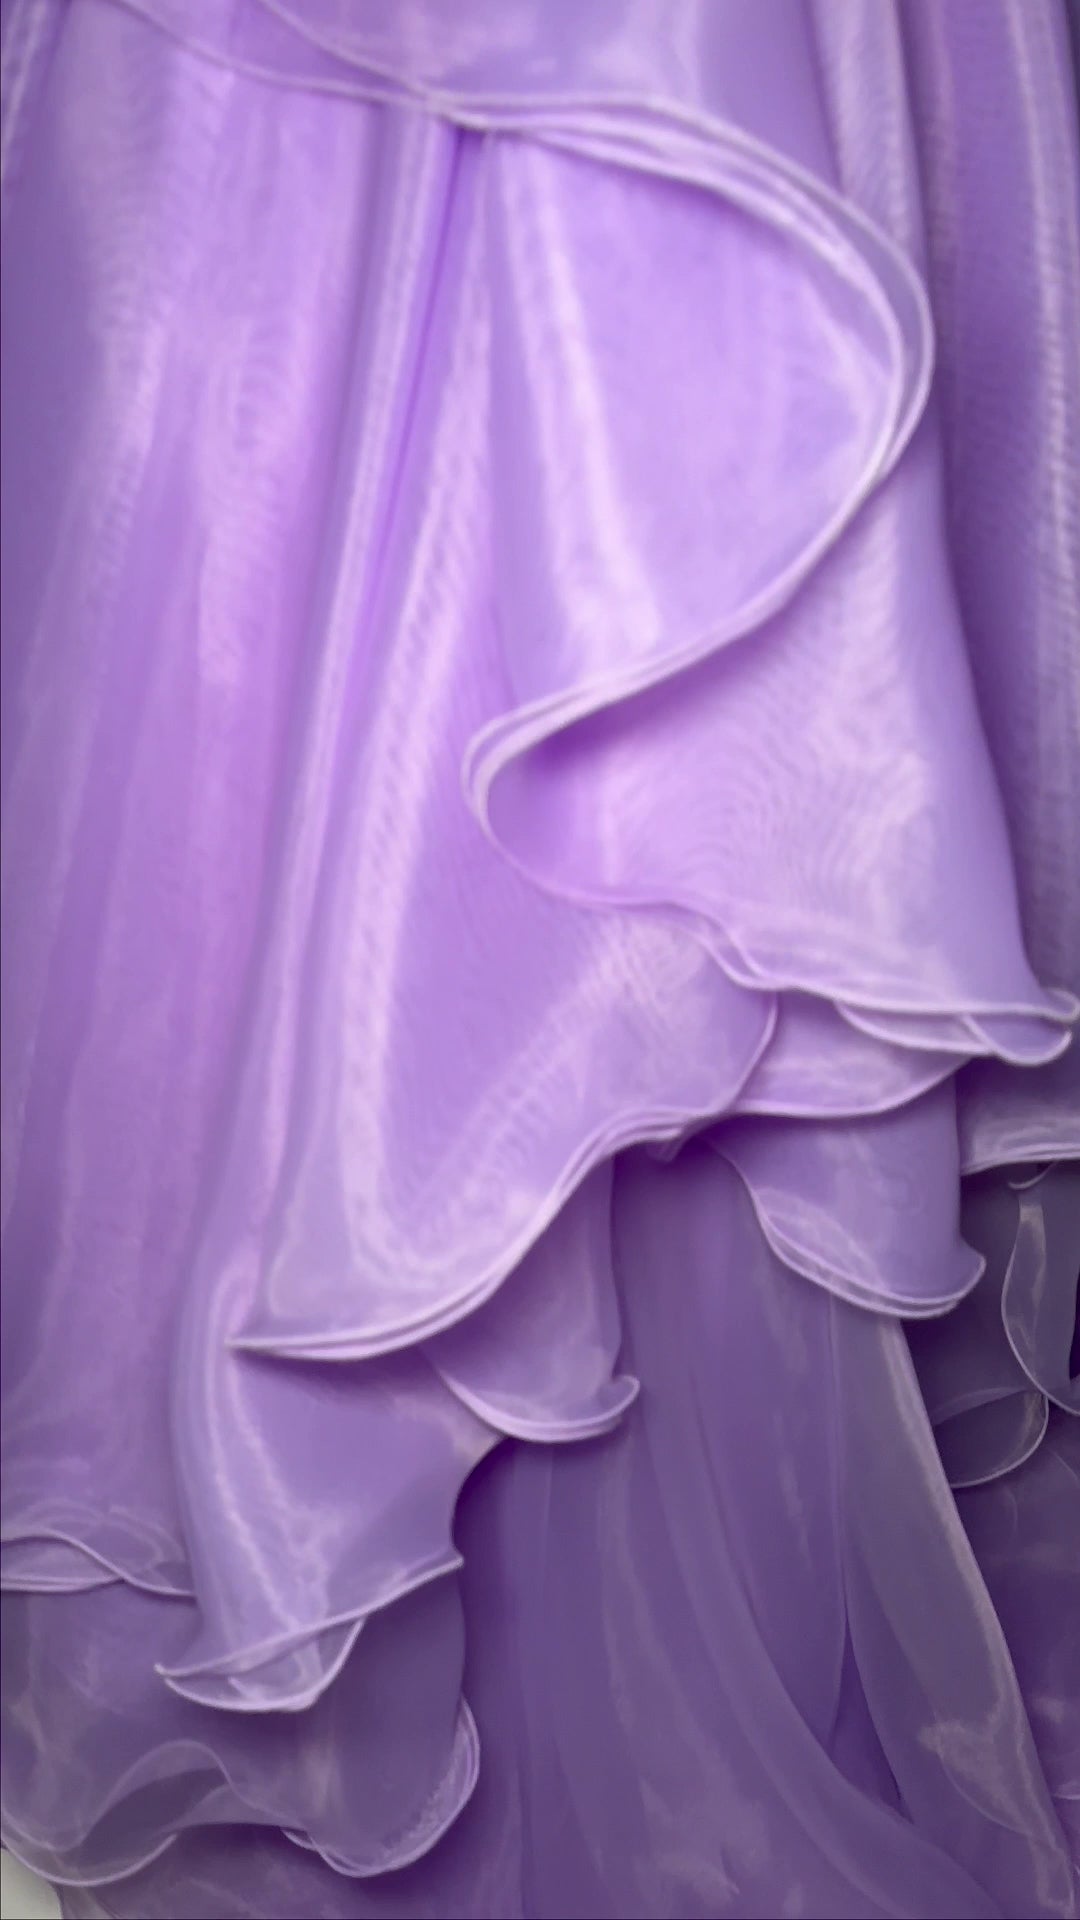 Get ready to make a statement at your next formal event with the Ashley Lauren 11601 Long Prom Dress. This elegant gown features a stunning organza ruffle side overskirt with a daring slit, perfect for showing off your legs. Complete with a formal pageant-worthy design, you'll be sure to turn heads all night long. An overskirt that is here to slay! This fabulous ruffle organza side overskirt is sure to look incredible with your next look. Pair it with your favorite ASHLEYlauren dress, jumpsuit or cocktail.